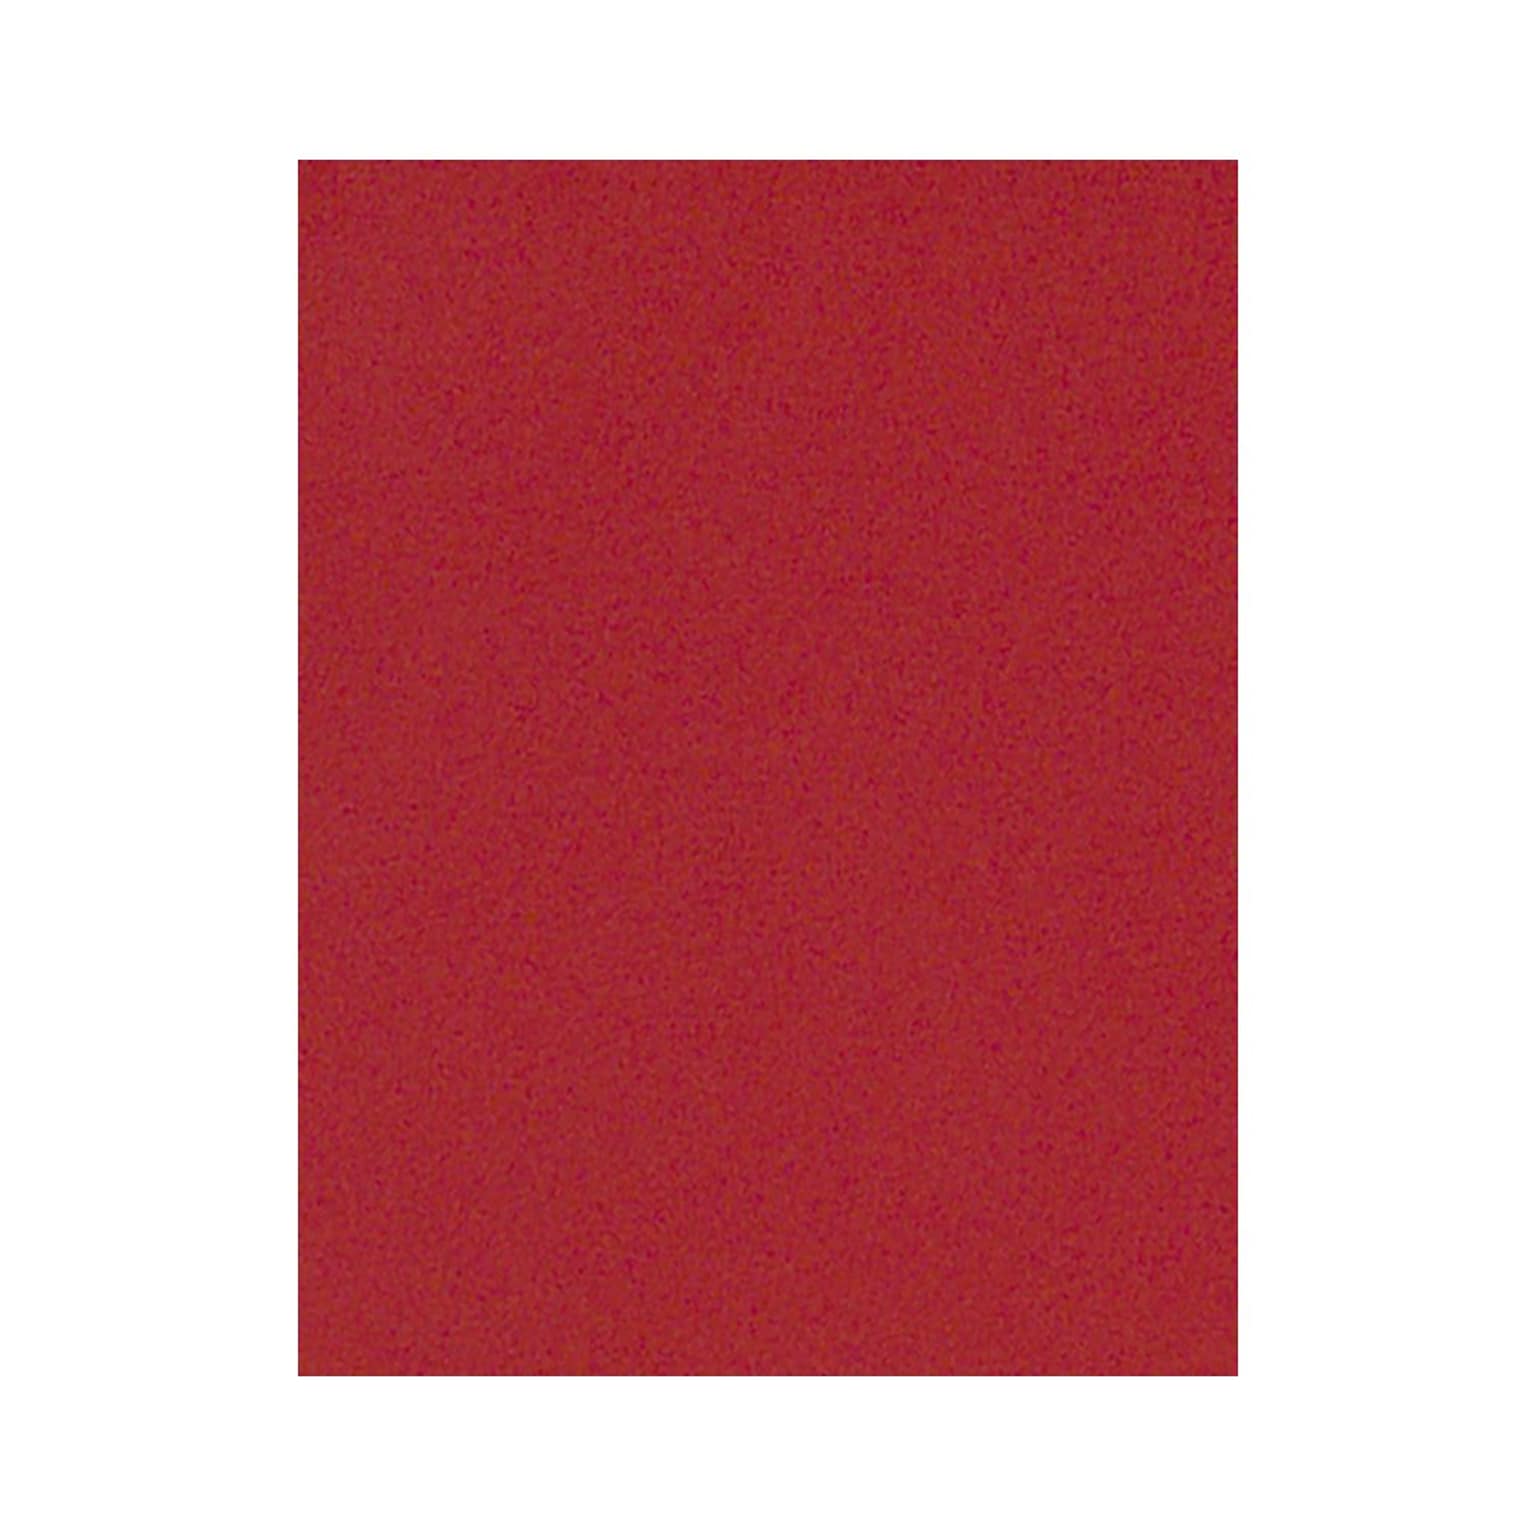 Lux Cardstock 8.5 x 11 inch Ruby Red 50/Pack